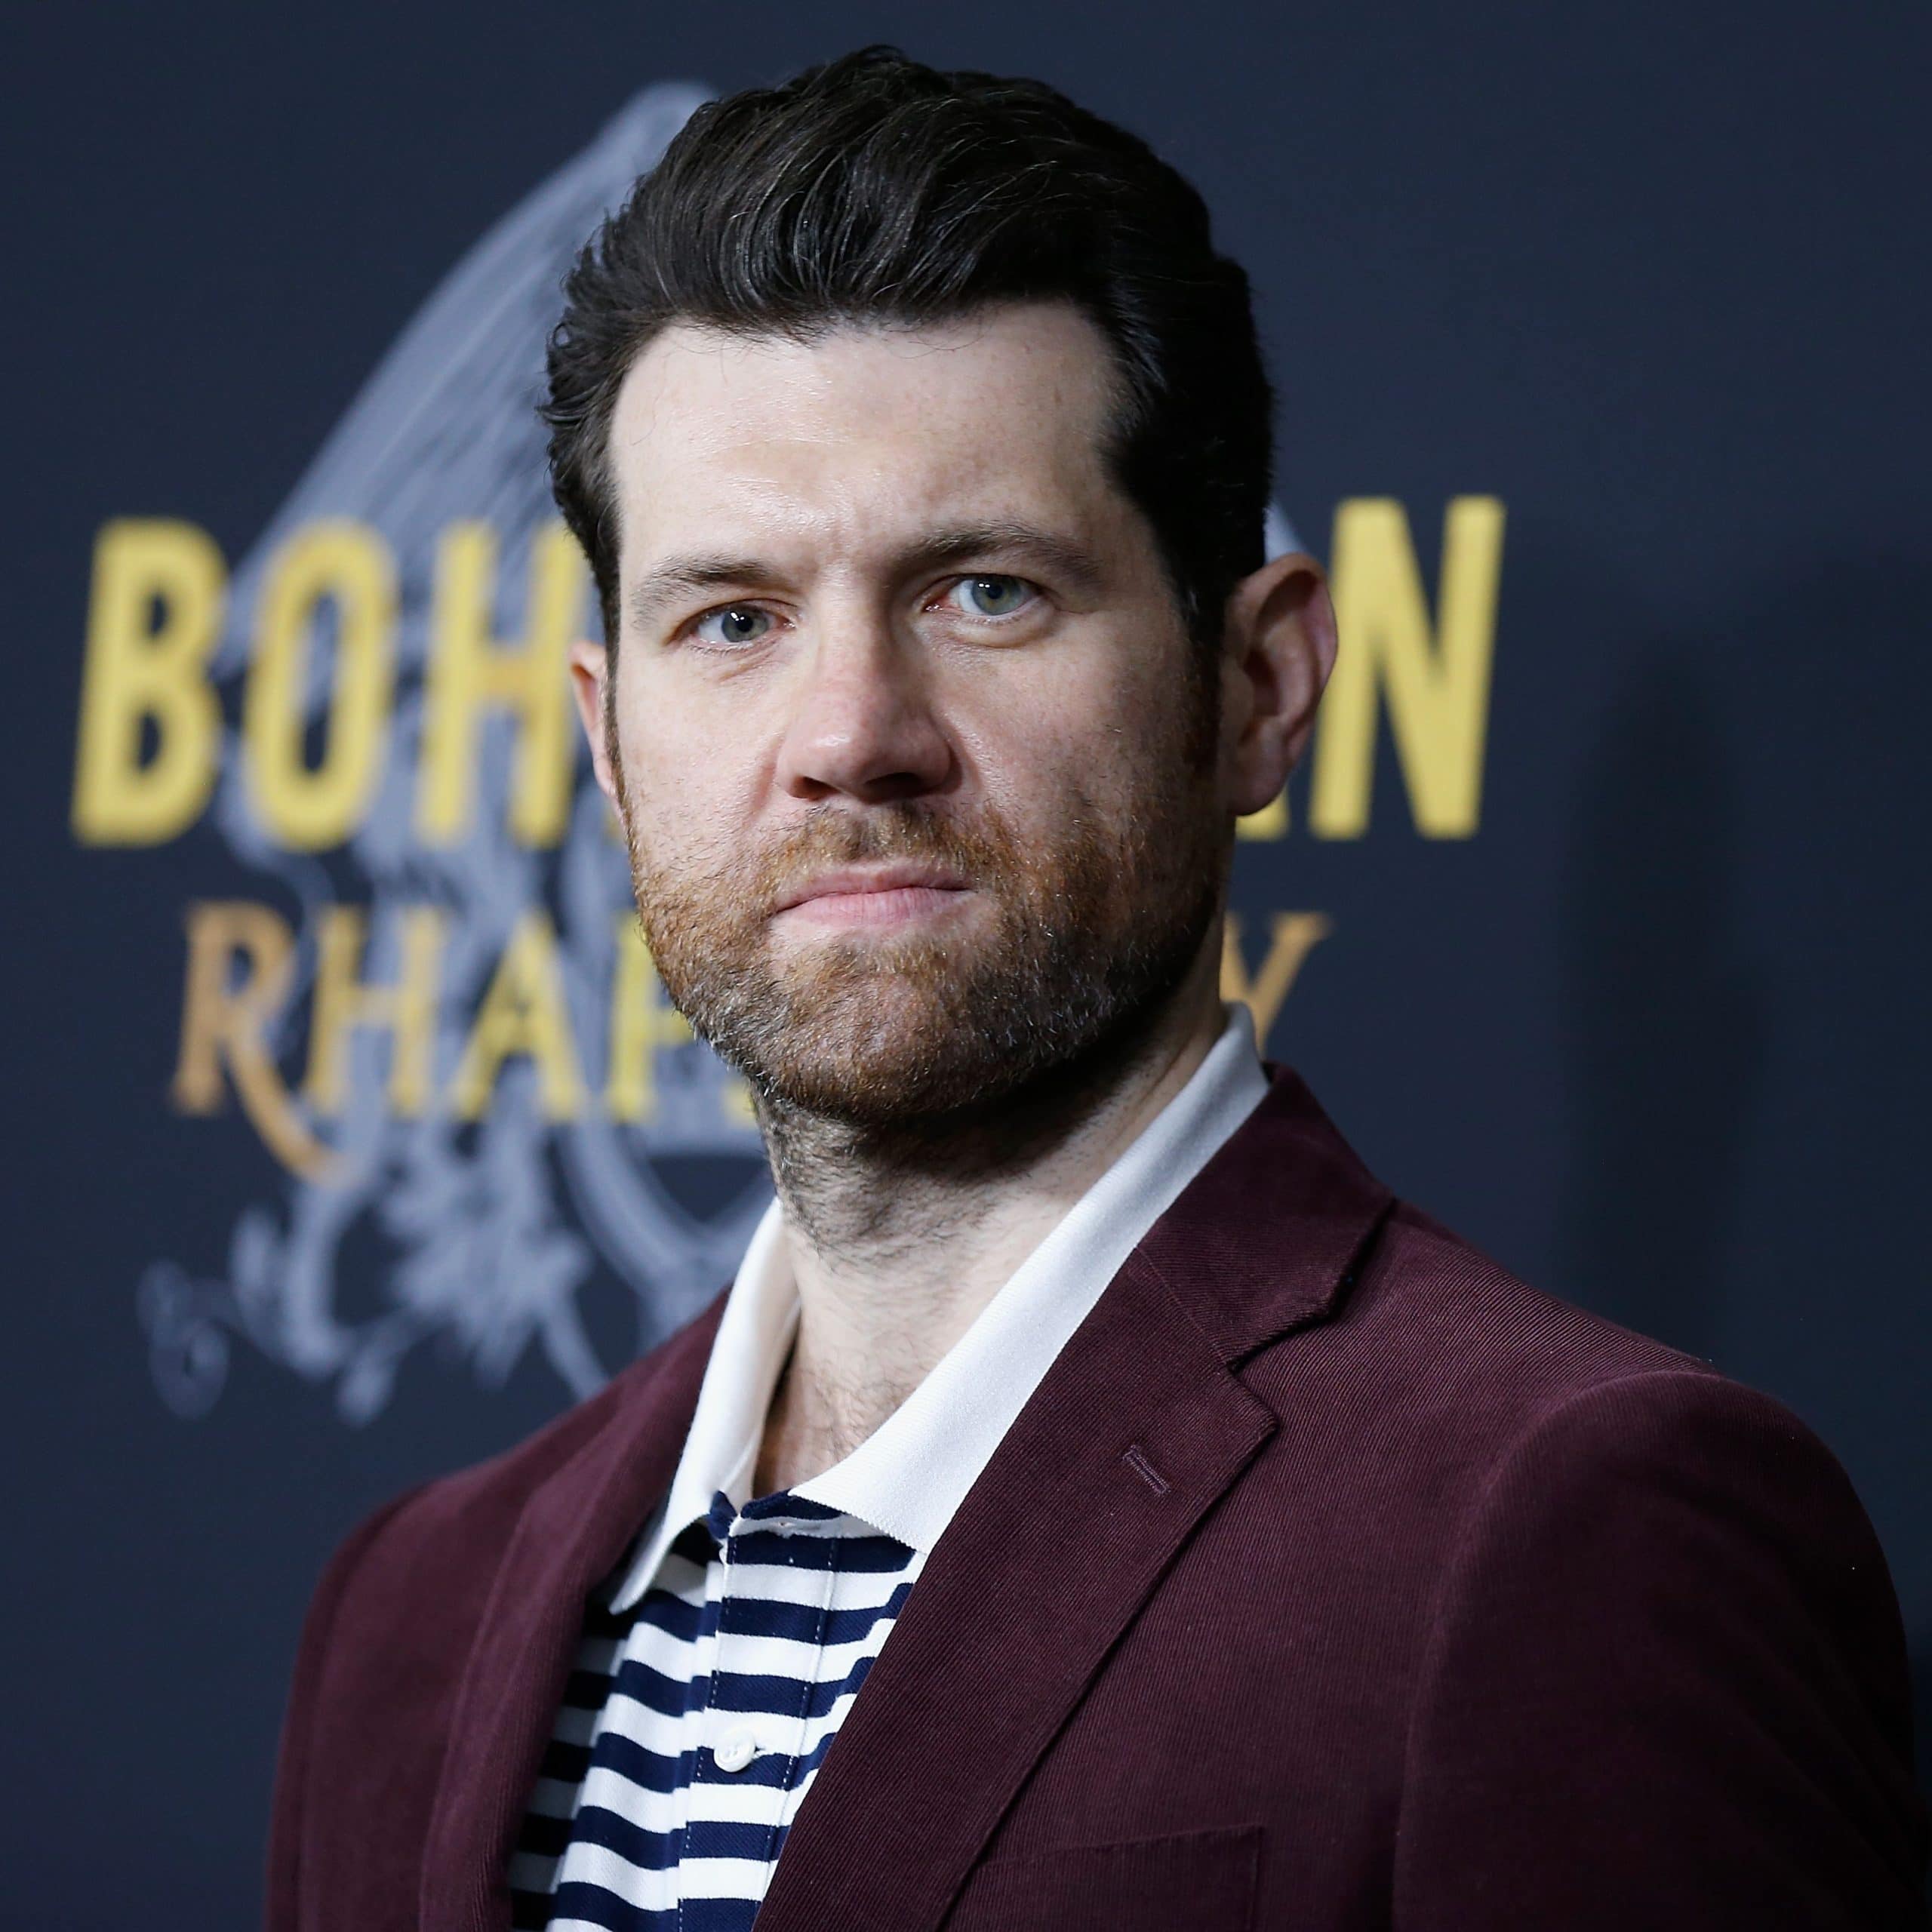 Billy Eichner American Comedian, Actor, Producer